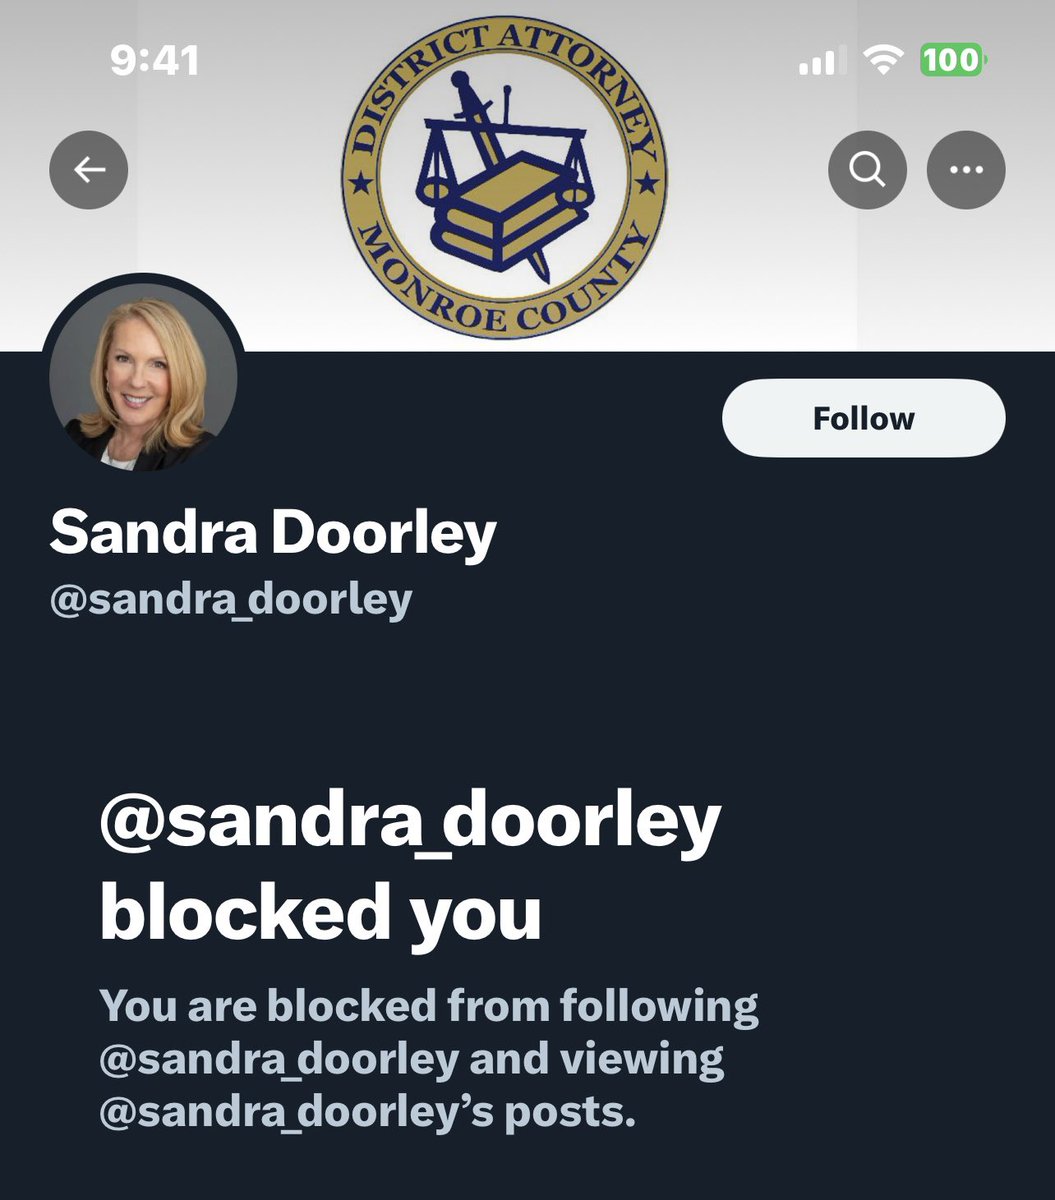 All I was doing was my job. Why did she block me for no reason?